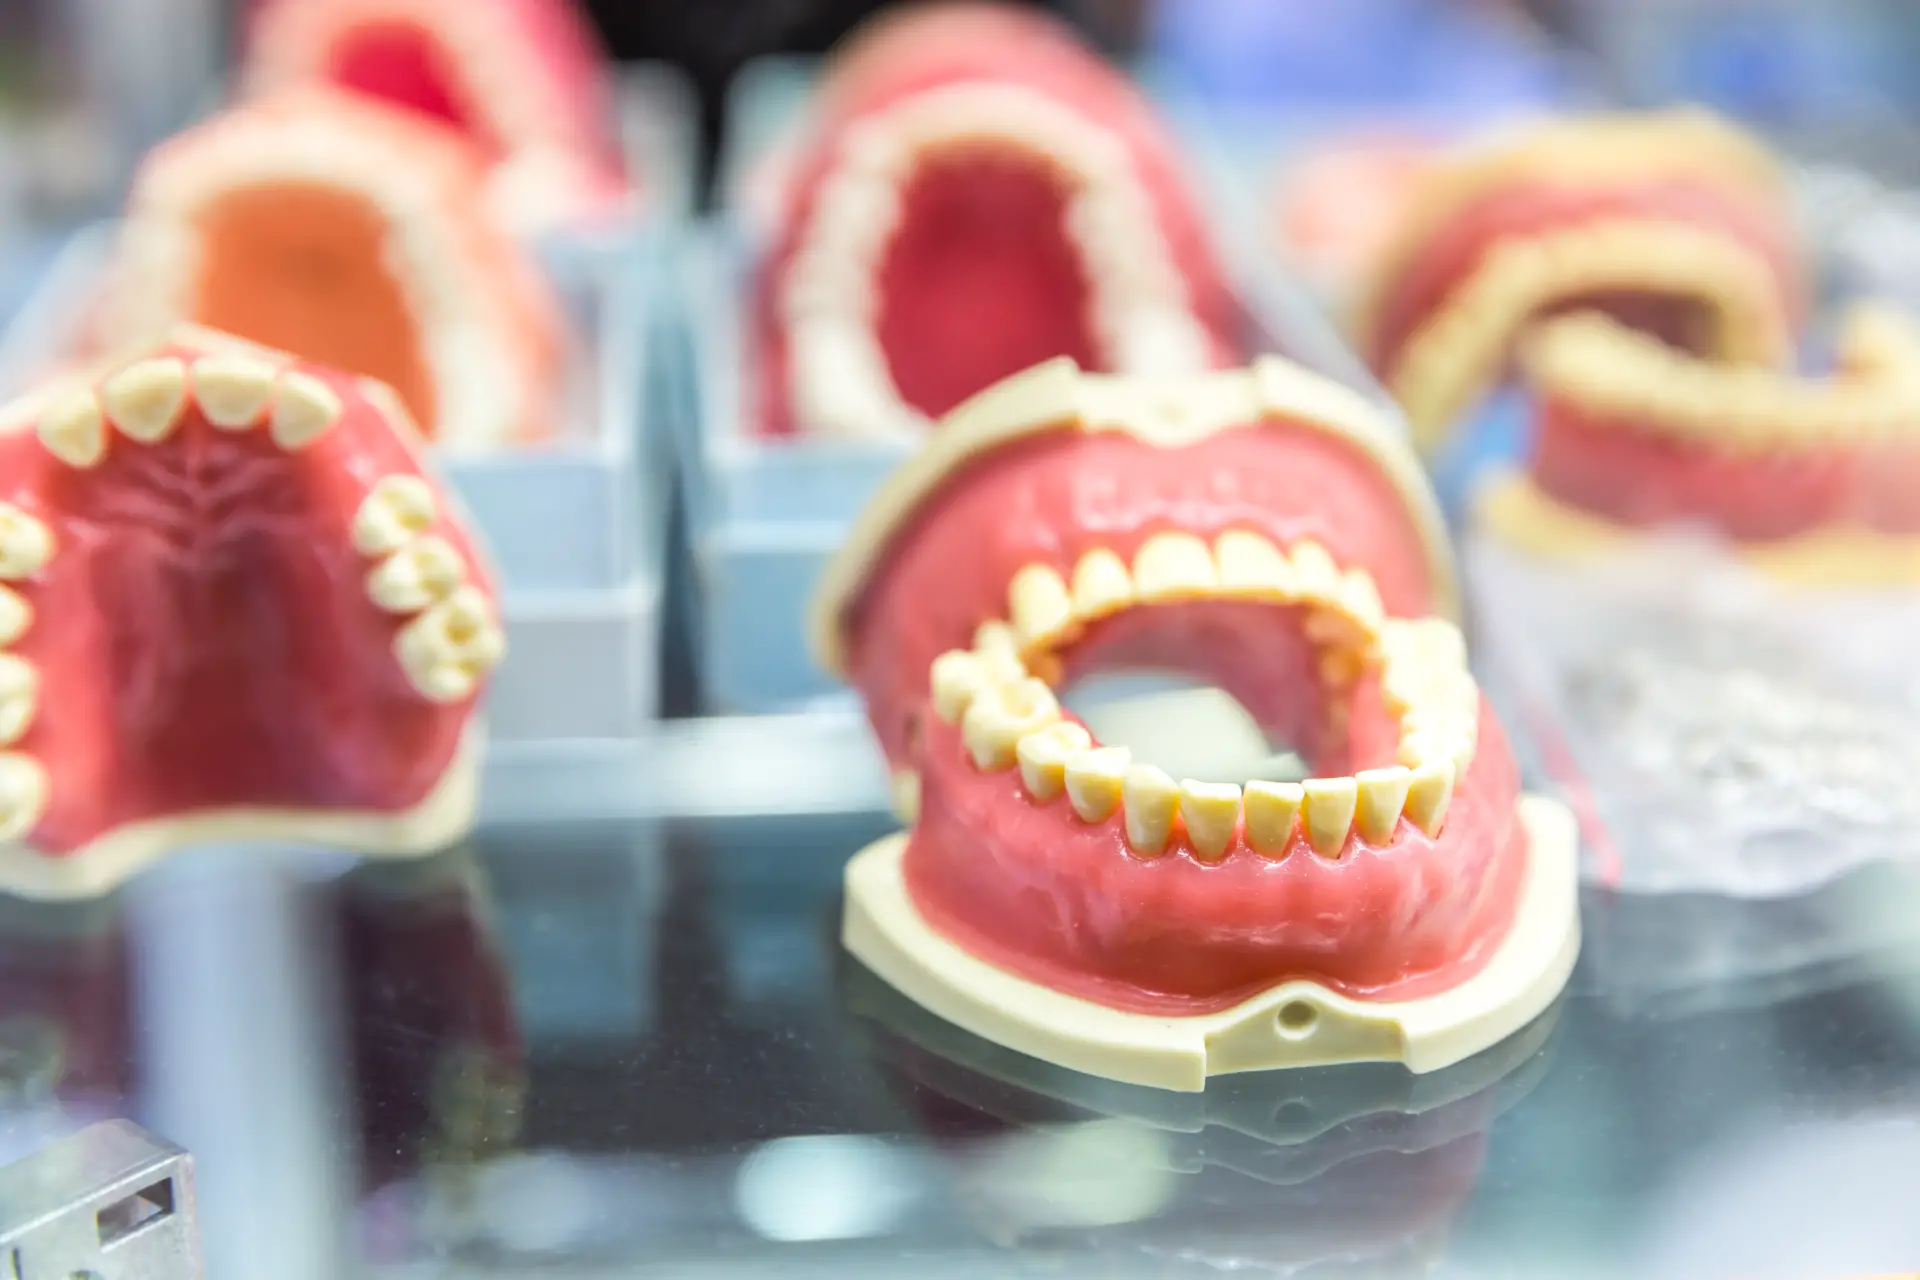 What are Dentures: Your Guide to Types, Benefits, and Care